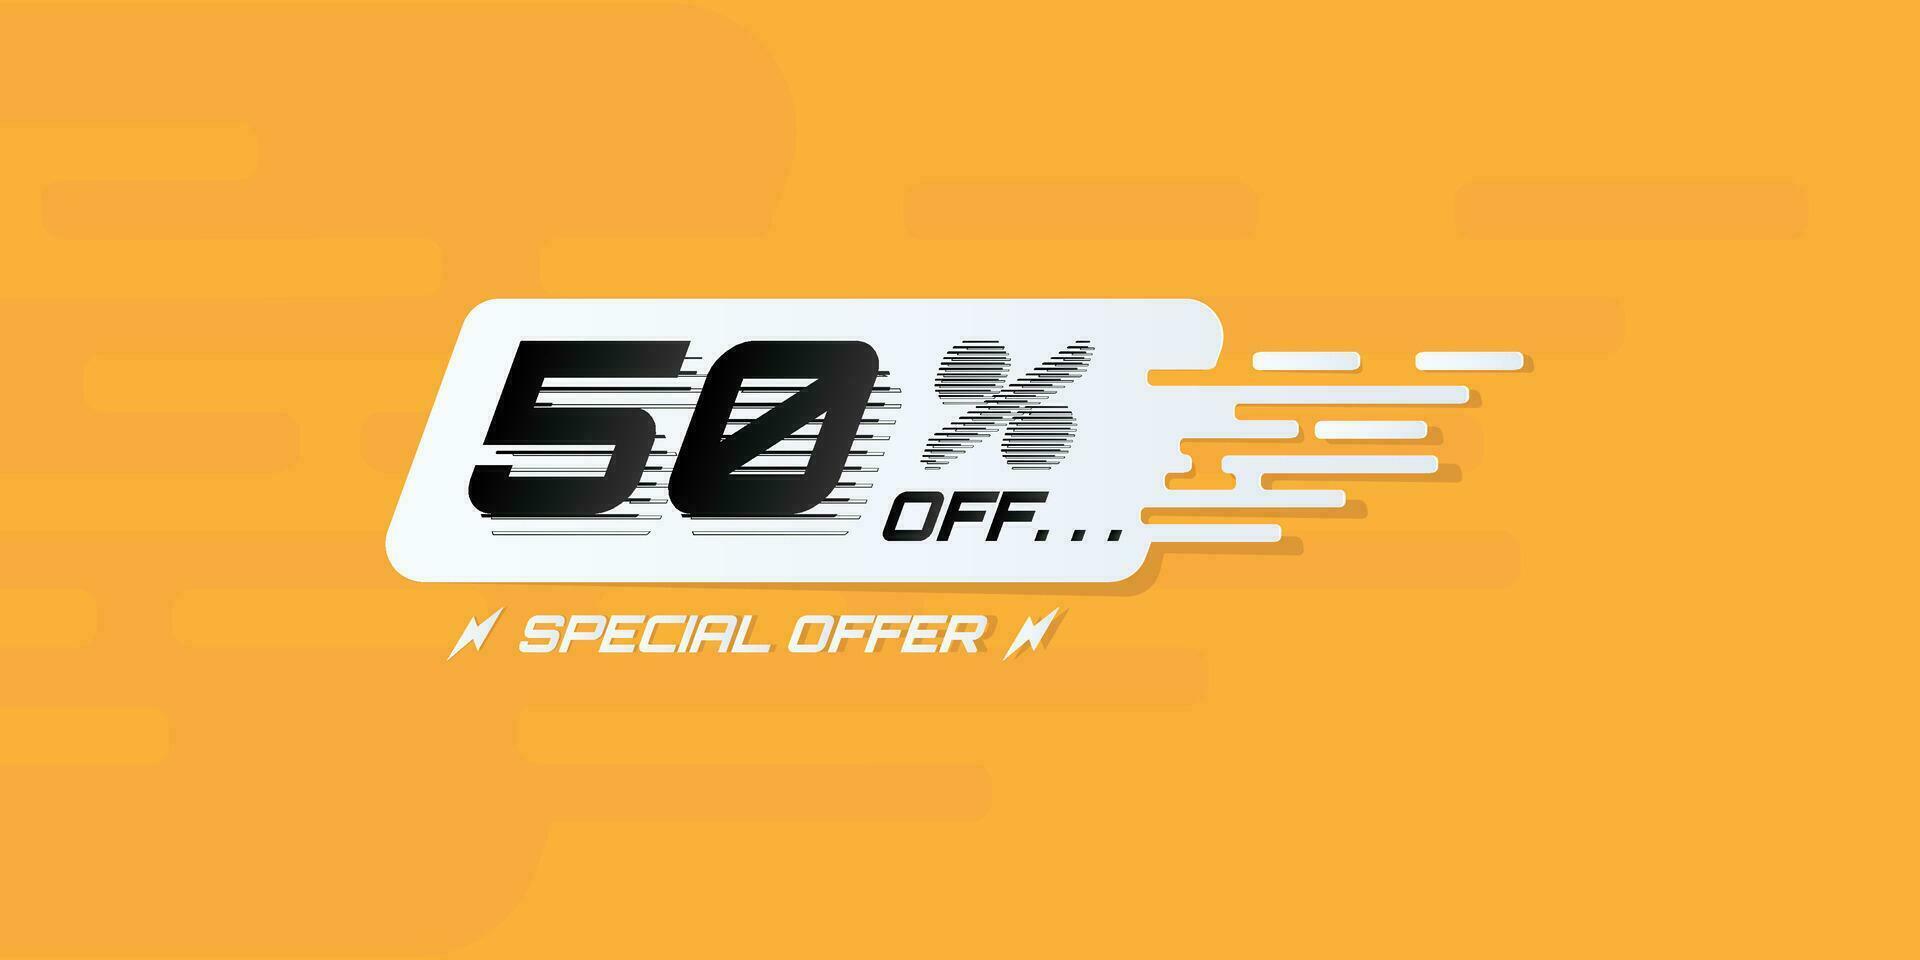 discount 50 percent special offer, coupon, voucher vector illustration